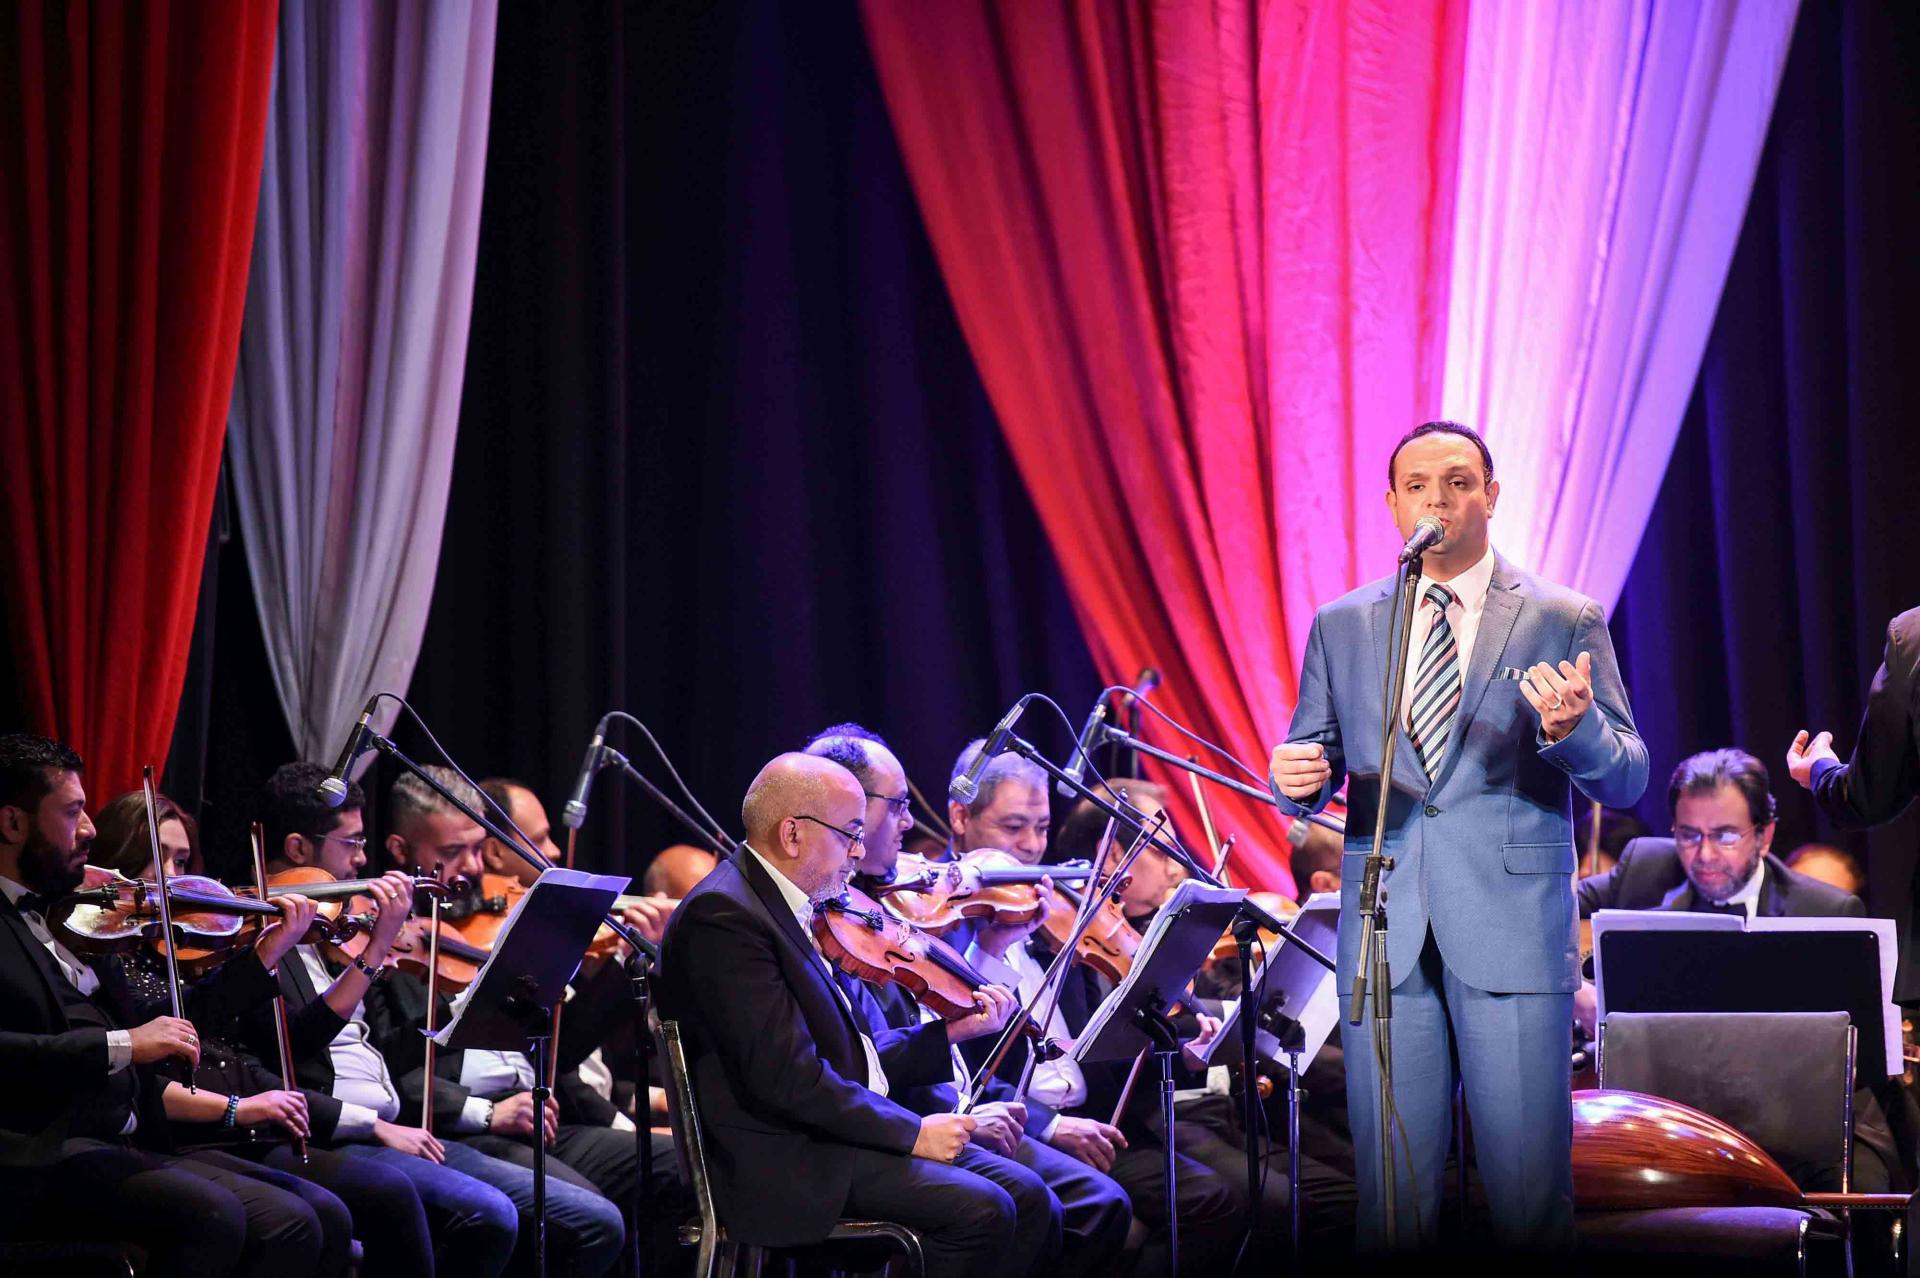 "Ya leil" ("O night"), he sings, with the dreamy languor of the original performer, Egyptian legend Mohamed Abdel Wahab